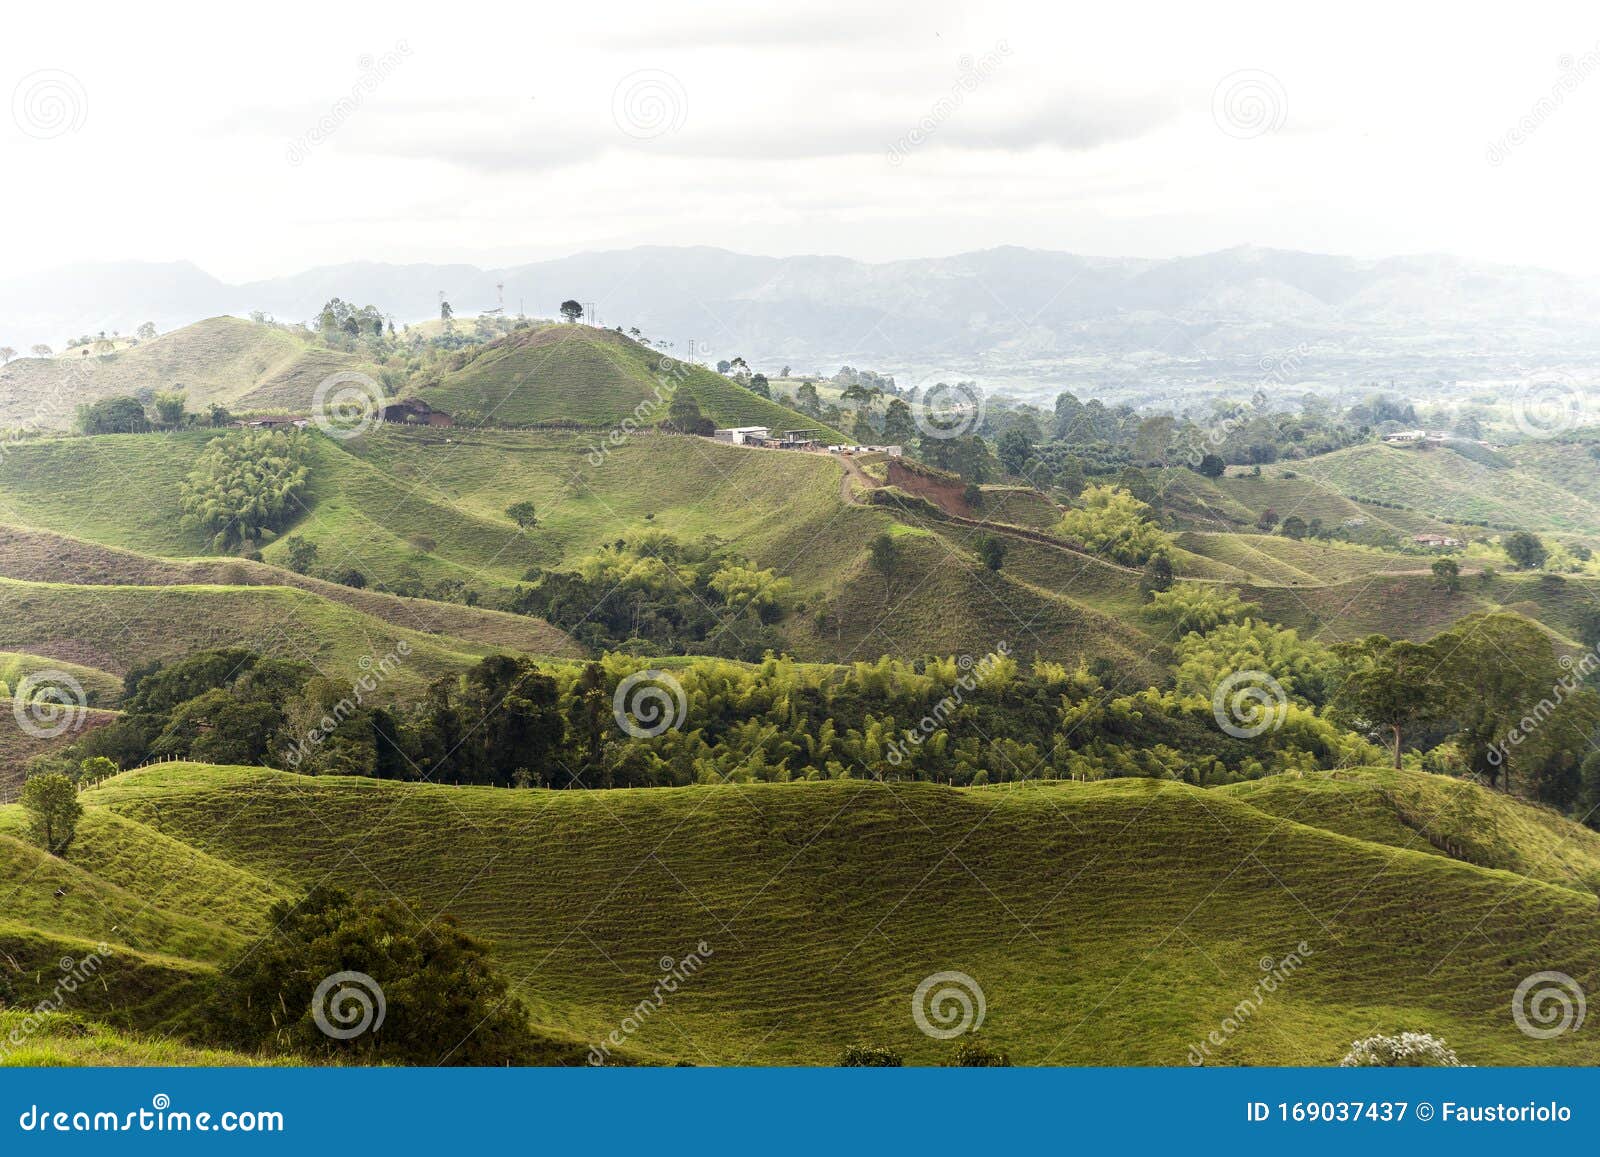 beautiful sights of lookout of filandia in quindio, colombia.